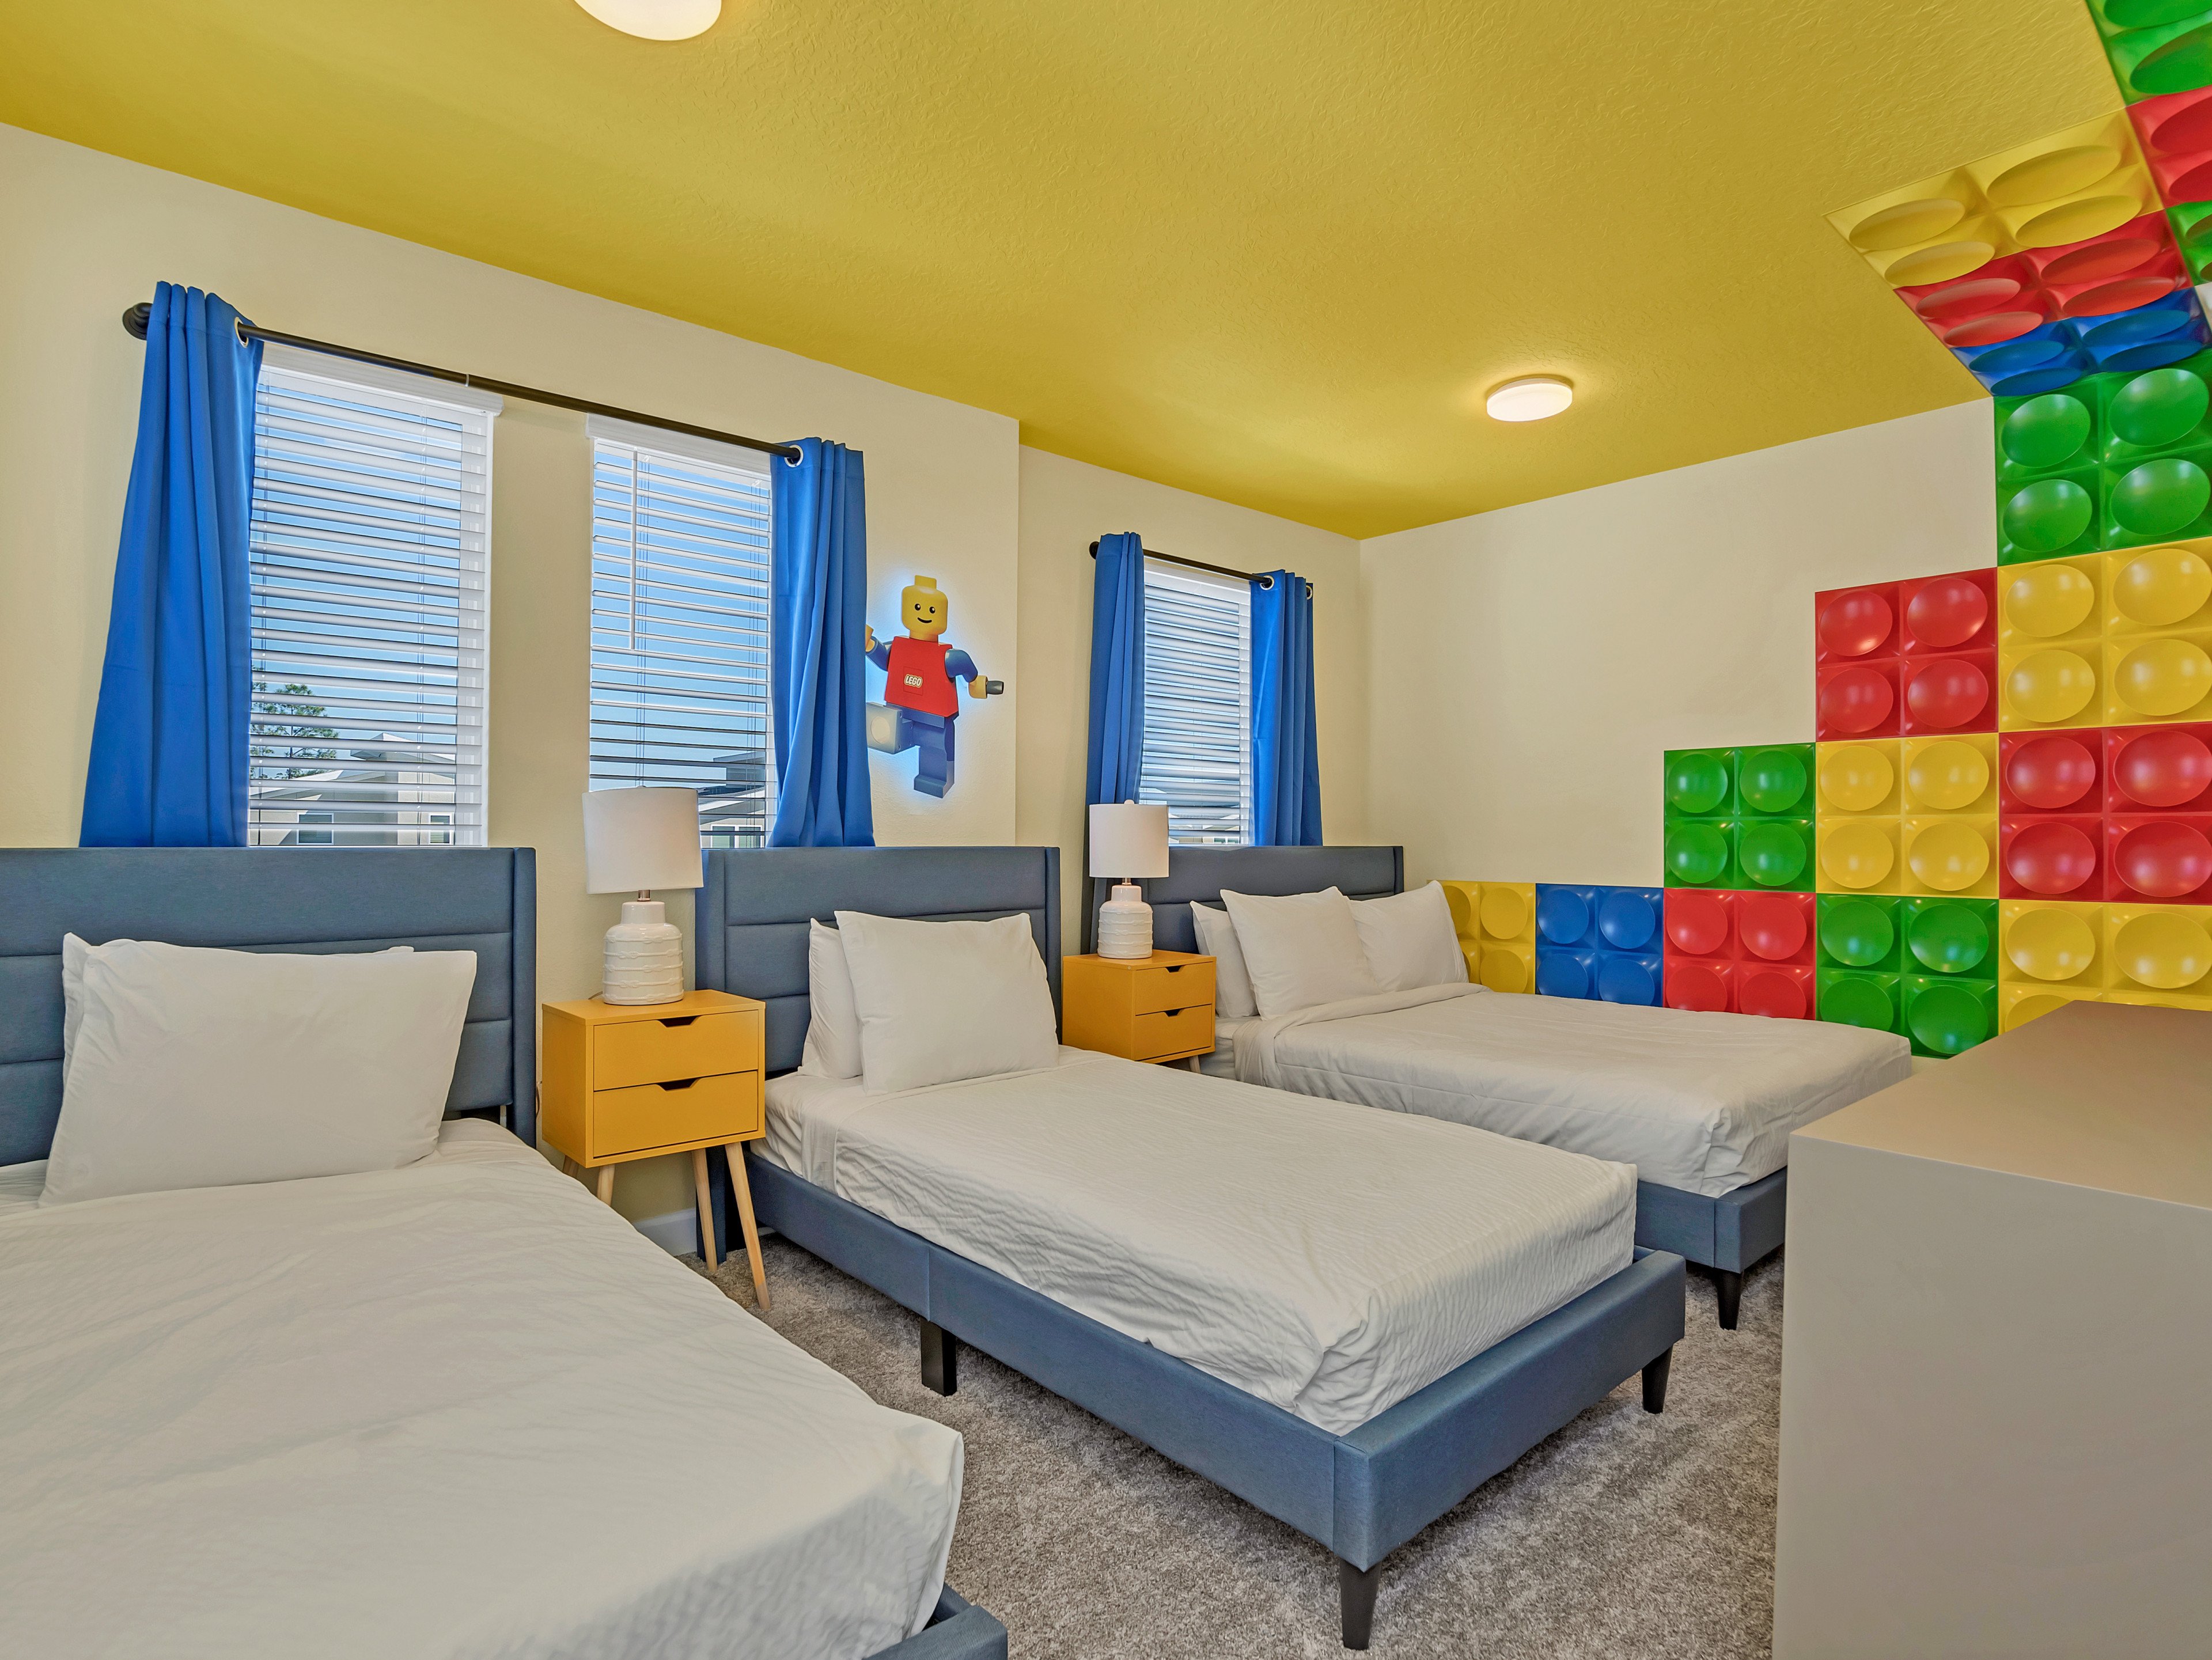  Orlando homes with Legoland-themed rooms - Championsgate 882